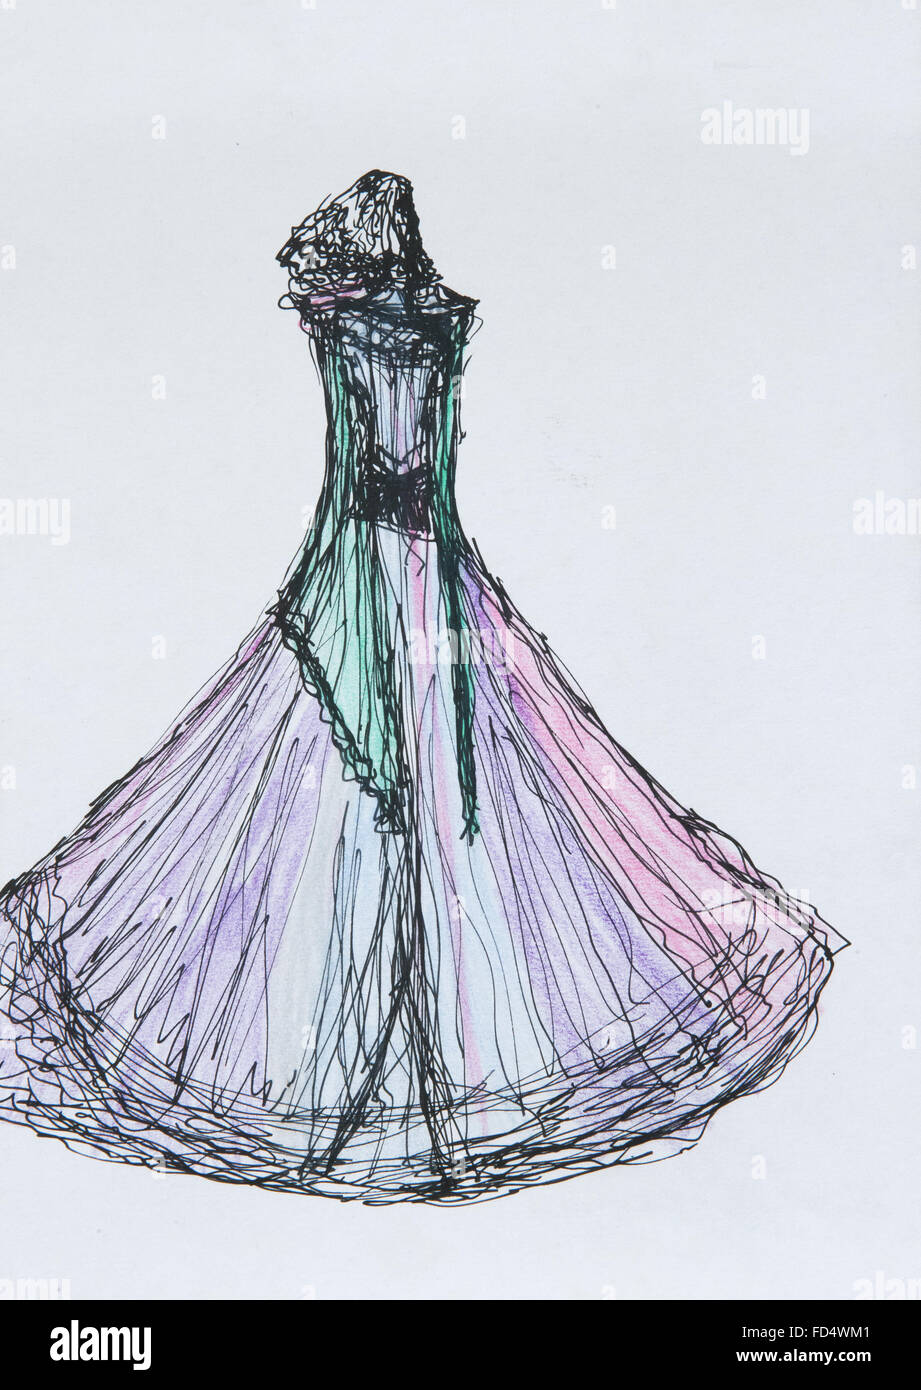 How to draw a fashion sketches like a fashion designer in 15 minutes -